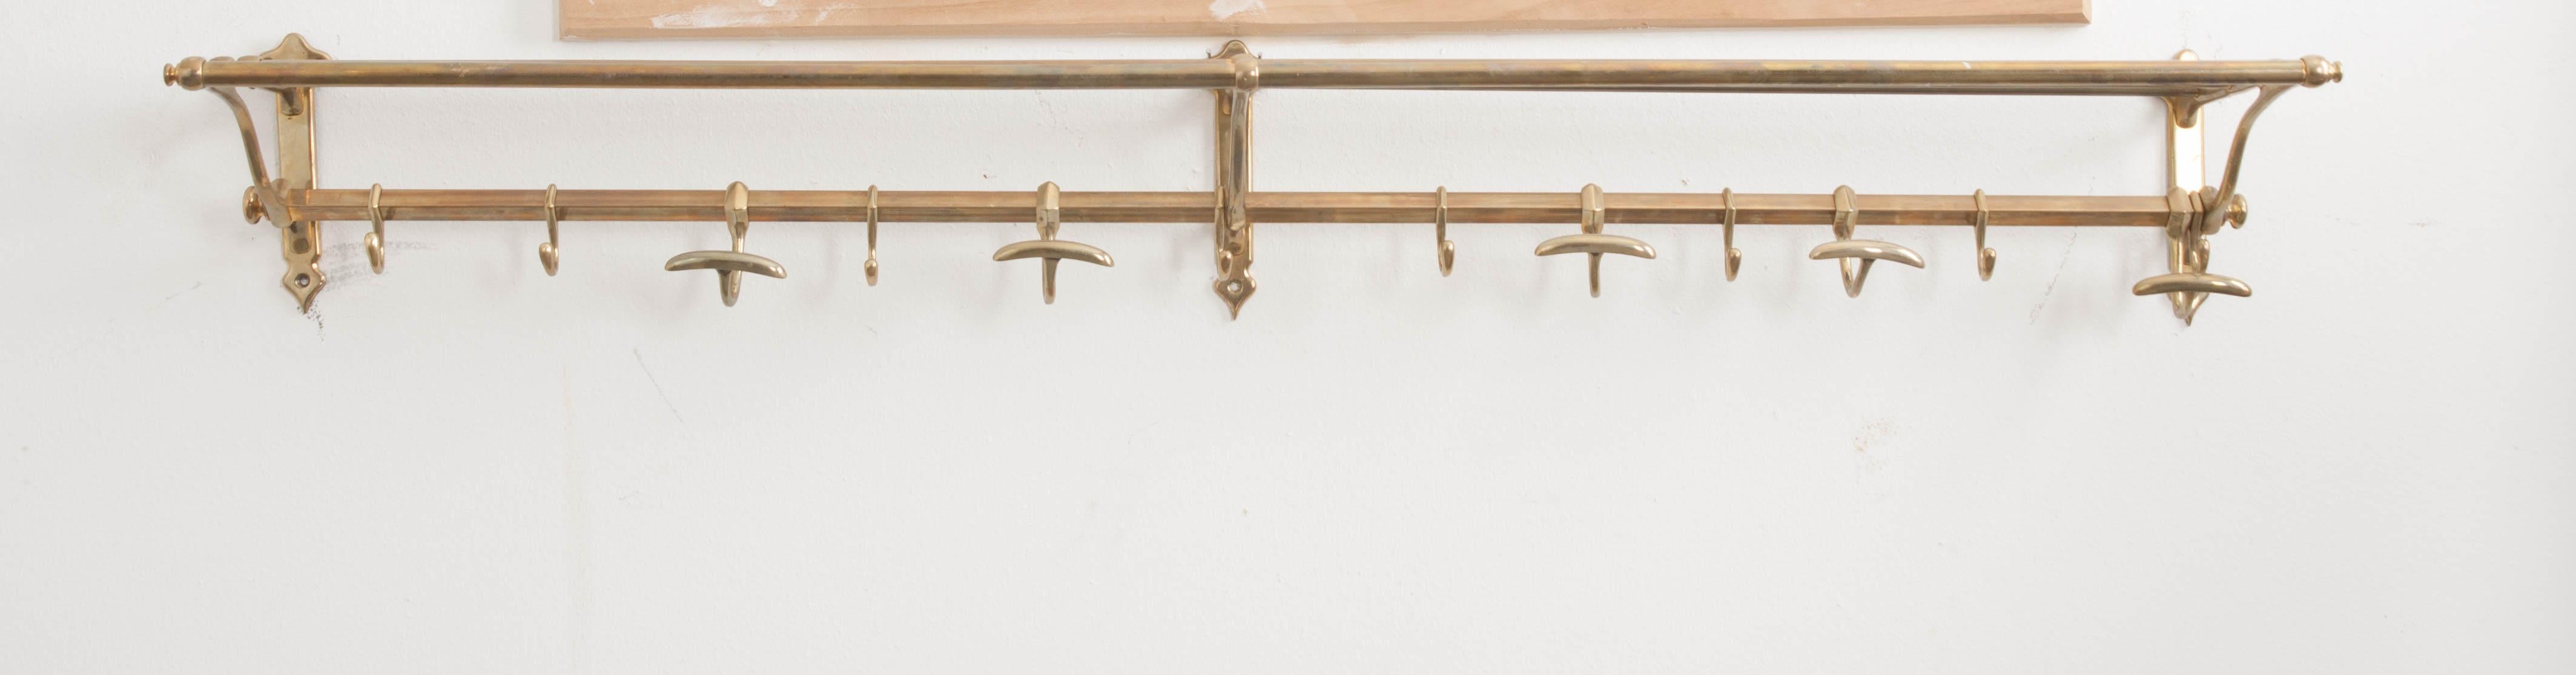 This fine patinated brass train car luggage rack with hat and coat hooks was made in England, circa 1890s, and features an open, tubular shelf supported by three solid brass wall-mounted brackets with another rack below which is outfitted with solid